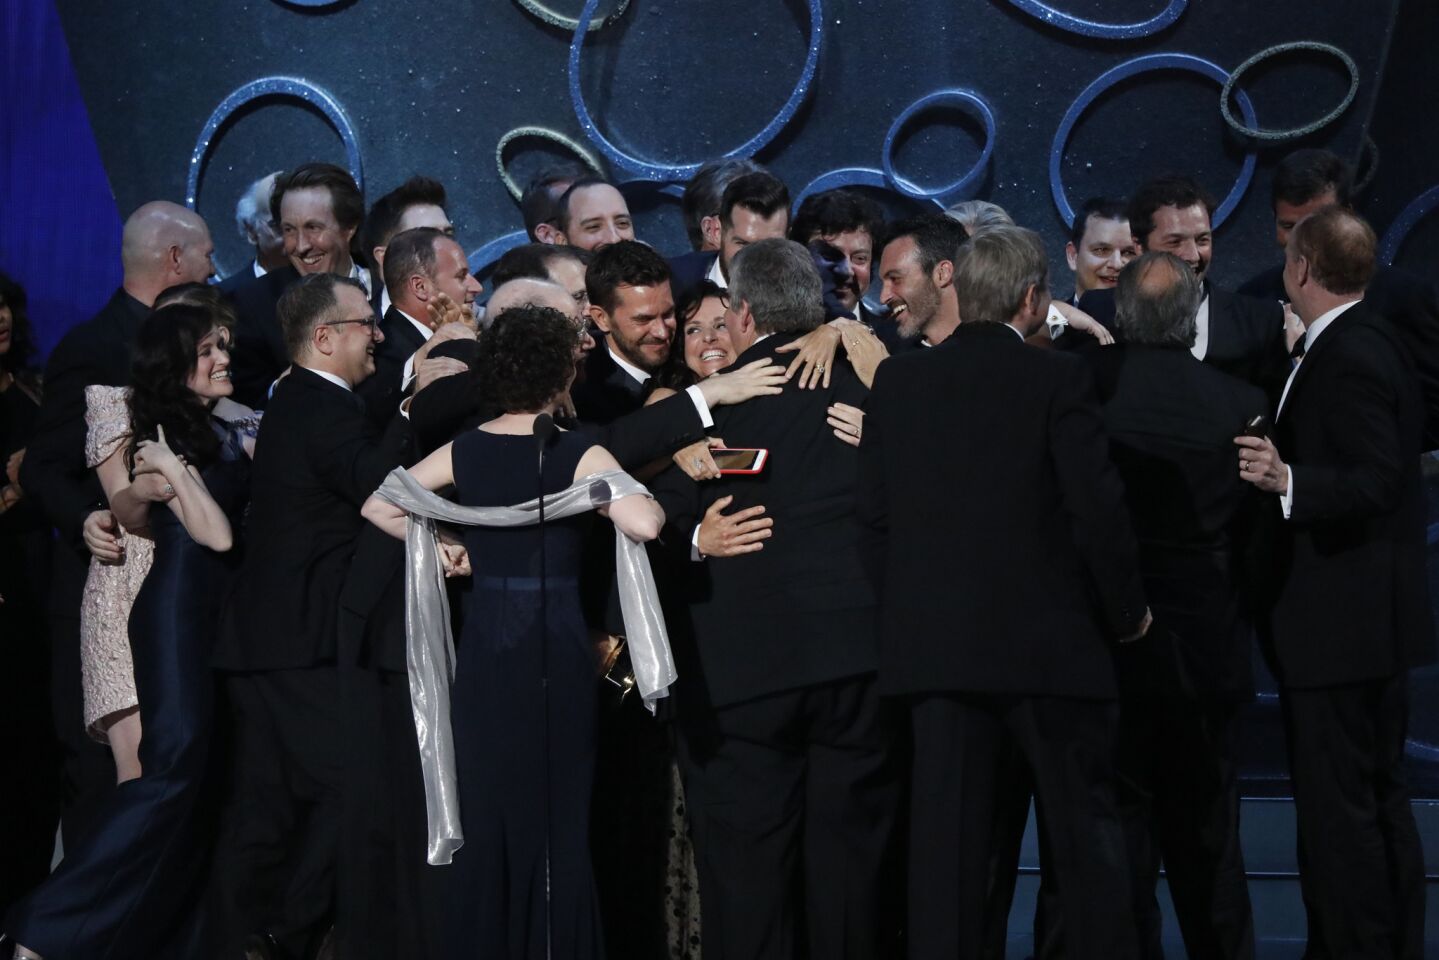 The cast and crew of "Veep" celebrate their win for comedy series